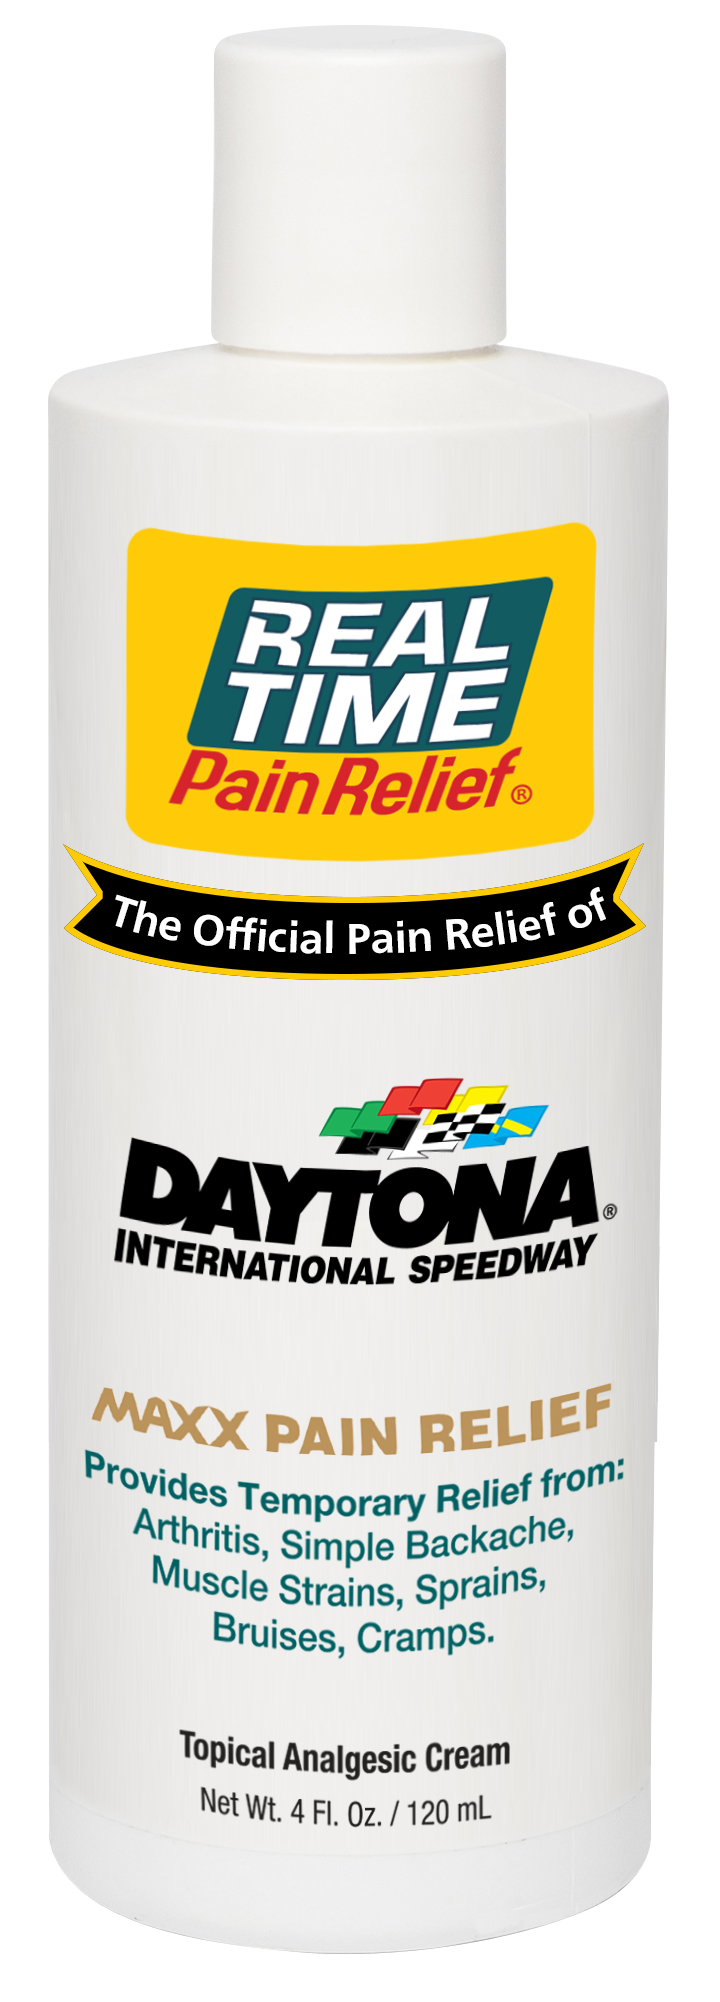 Real Time Pain Relief is a topical pain reliever that utilizes nature’s ingredients to provide Pain Relief You Can Trust®.